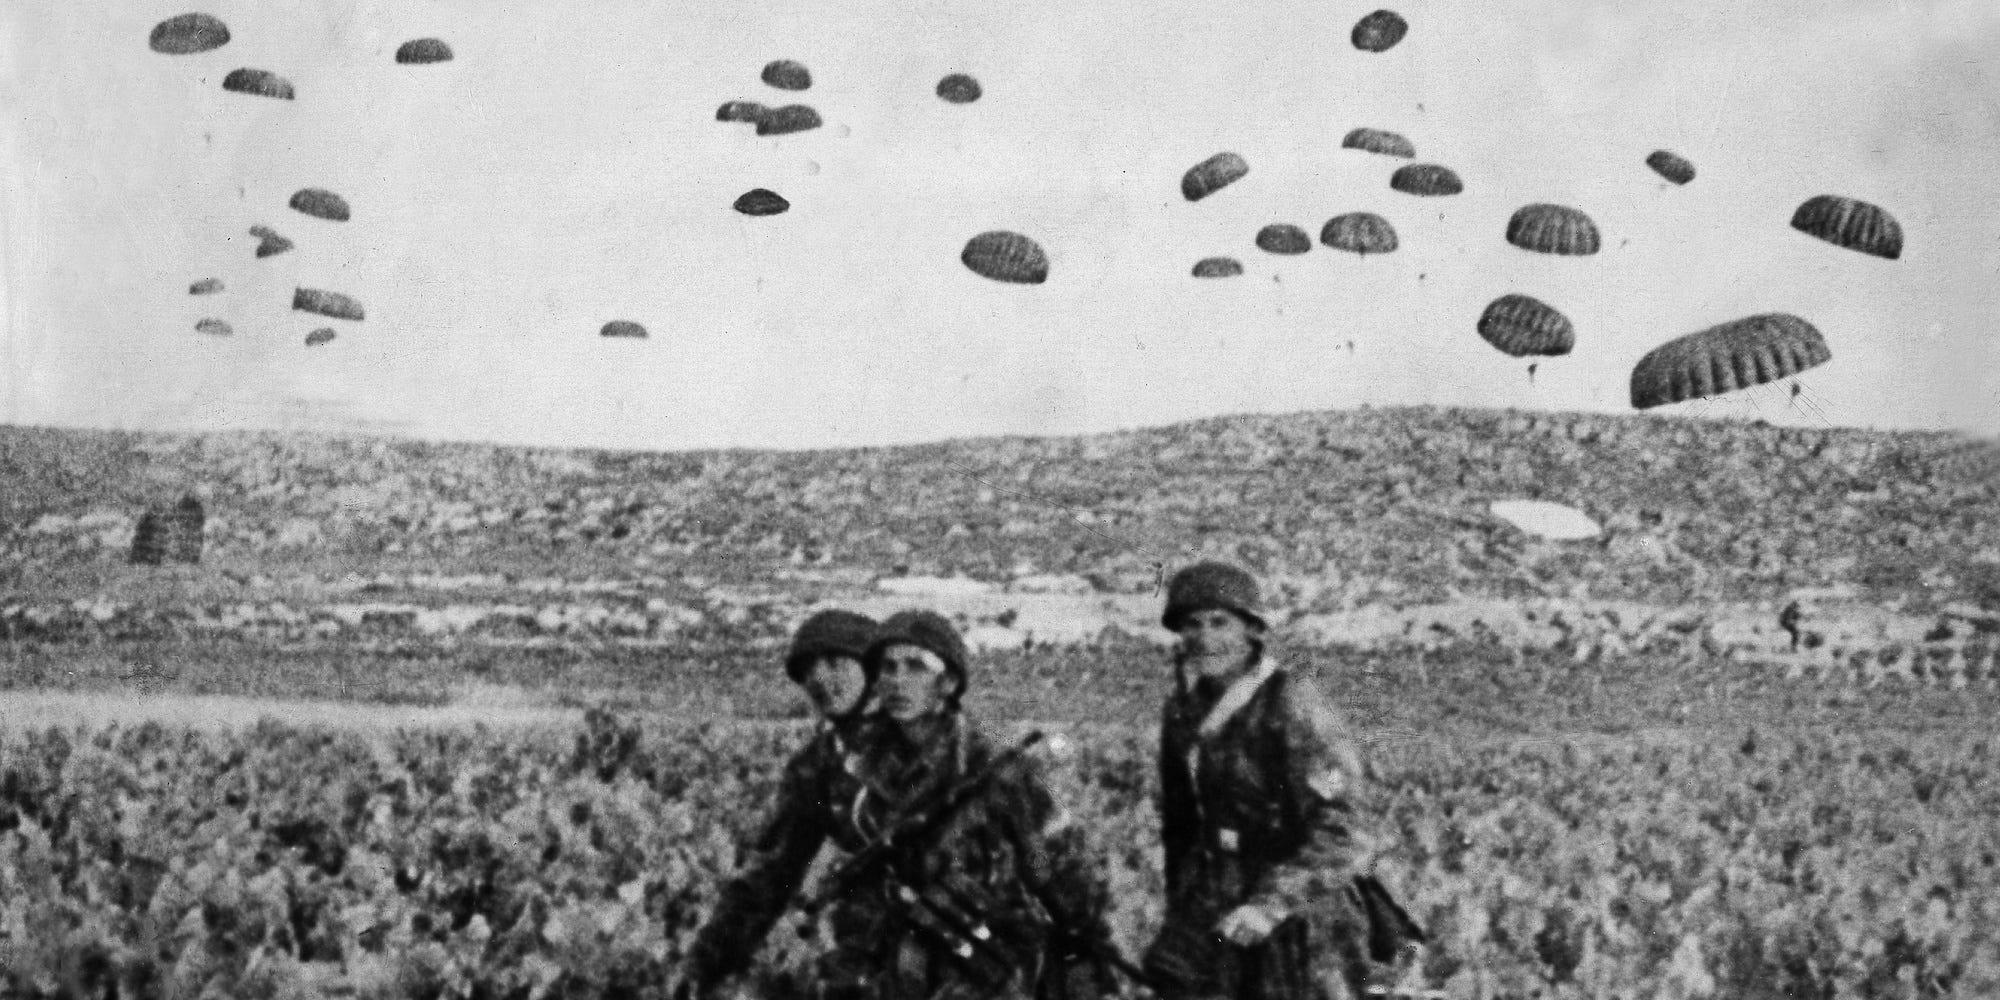 Nazi Germany paratroopers Fallschirmjagers